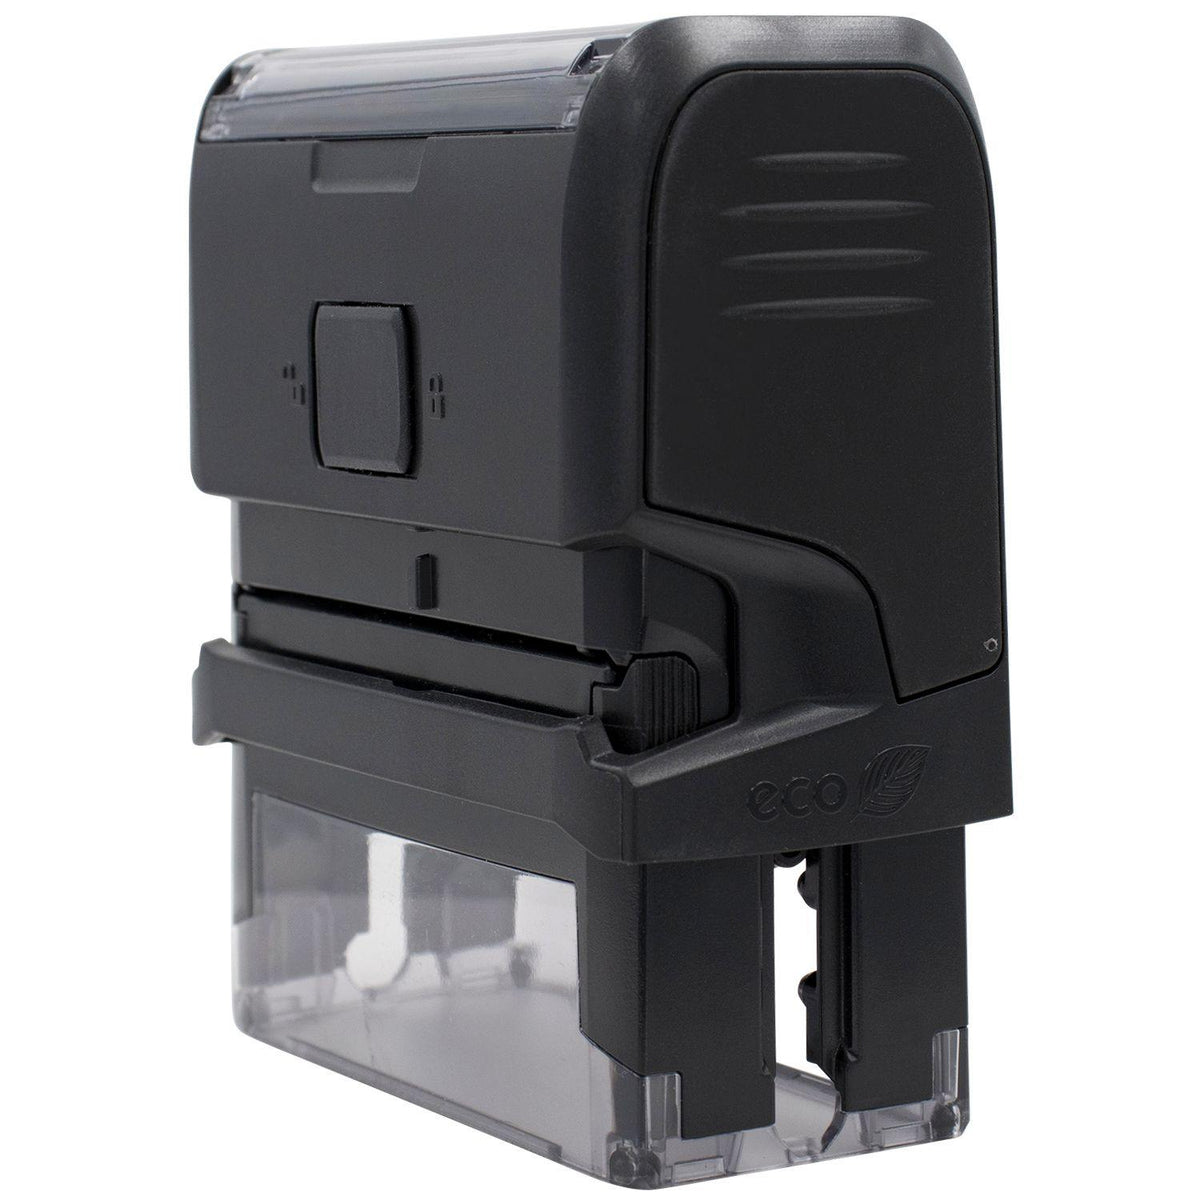 Side View of Large Self-Inking Bold Allergies Stamp at an Angle